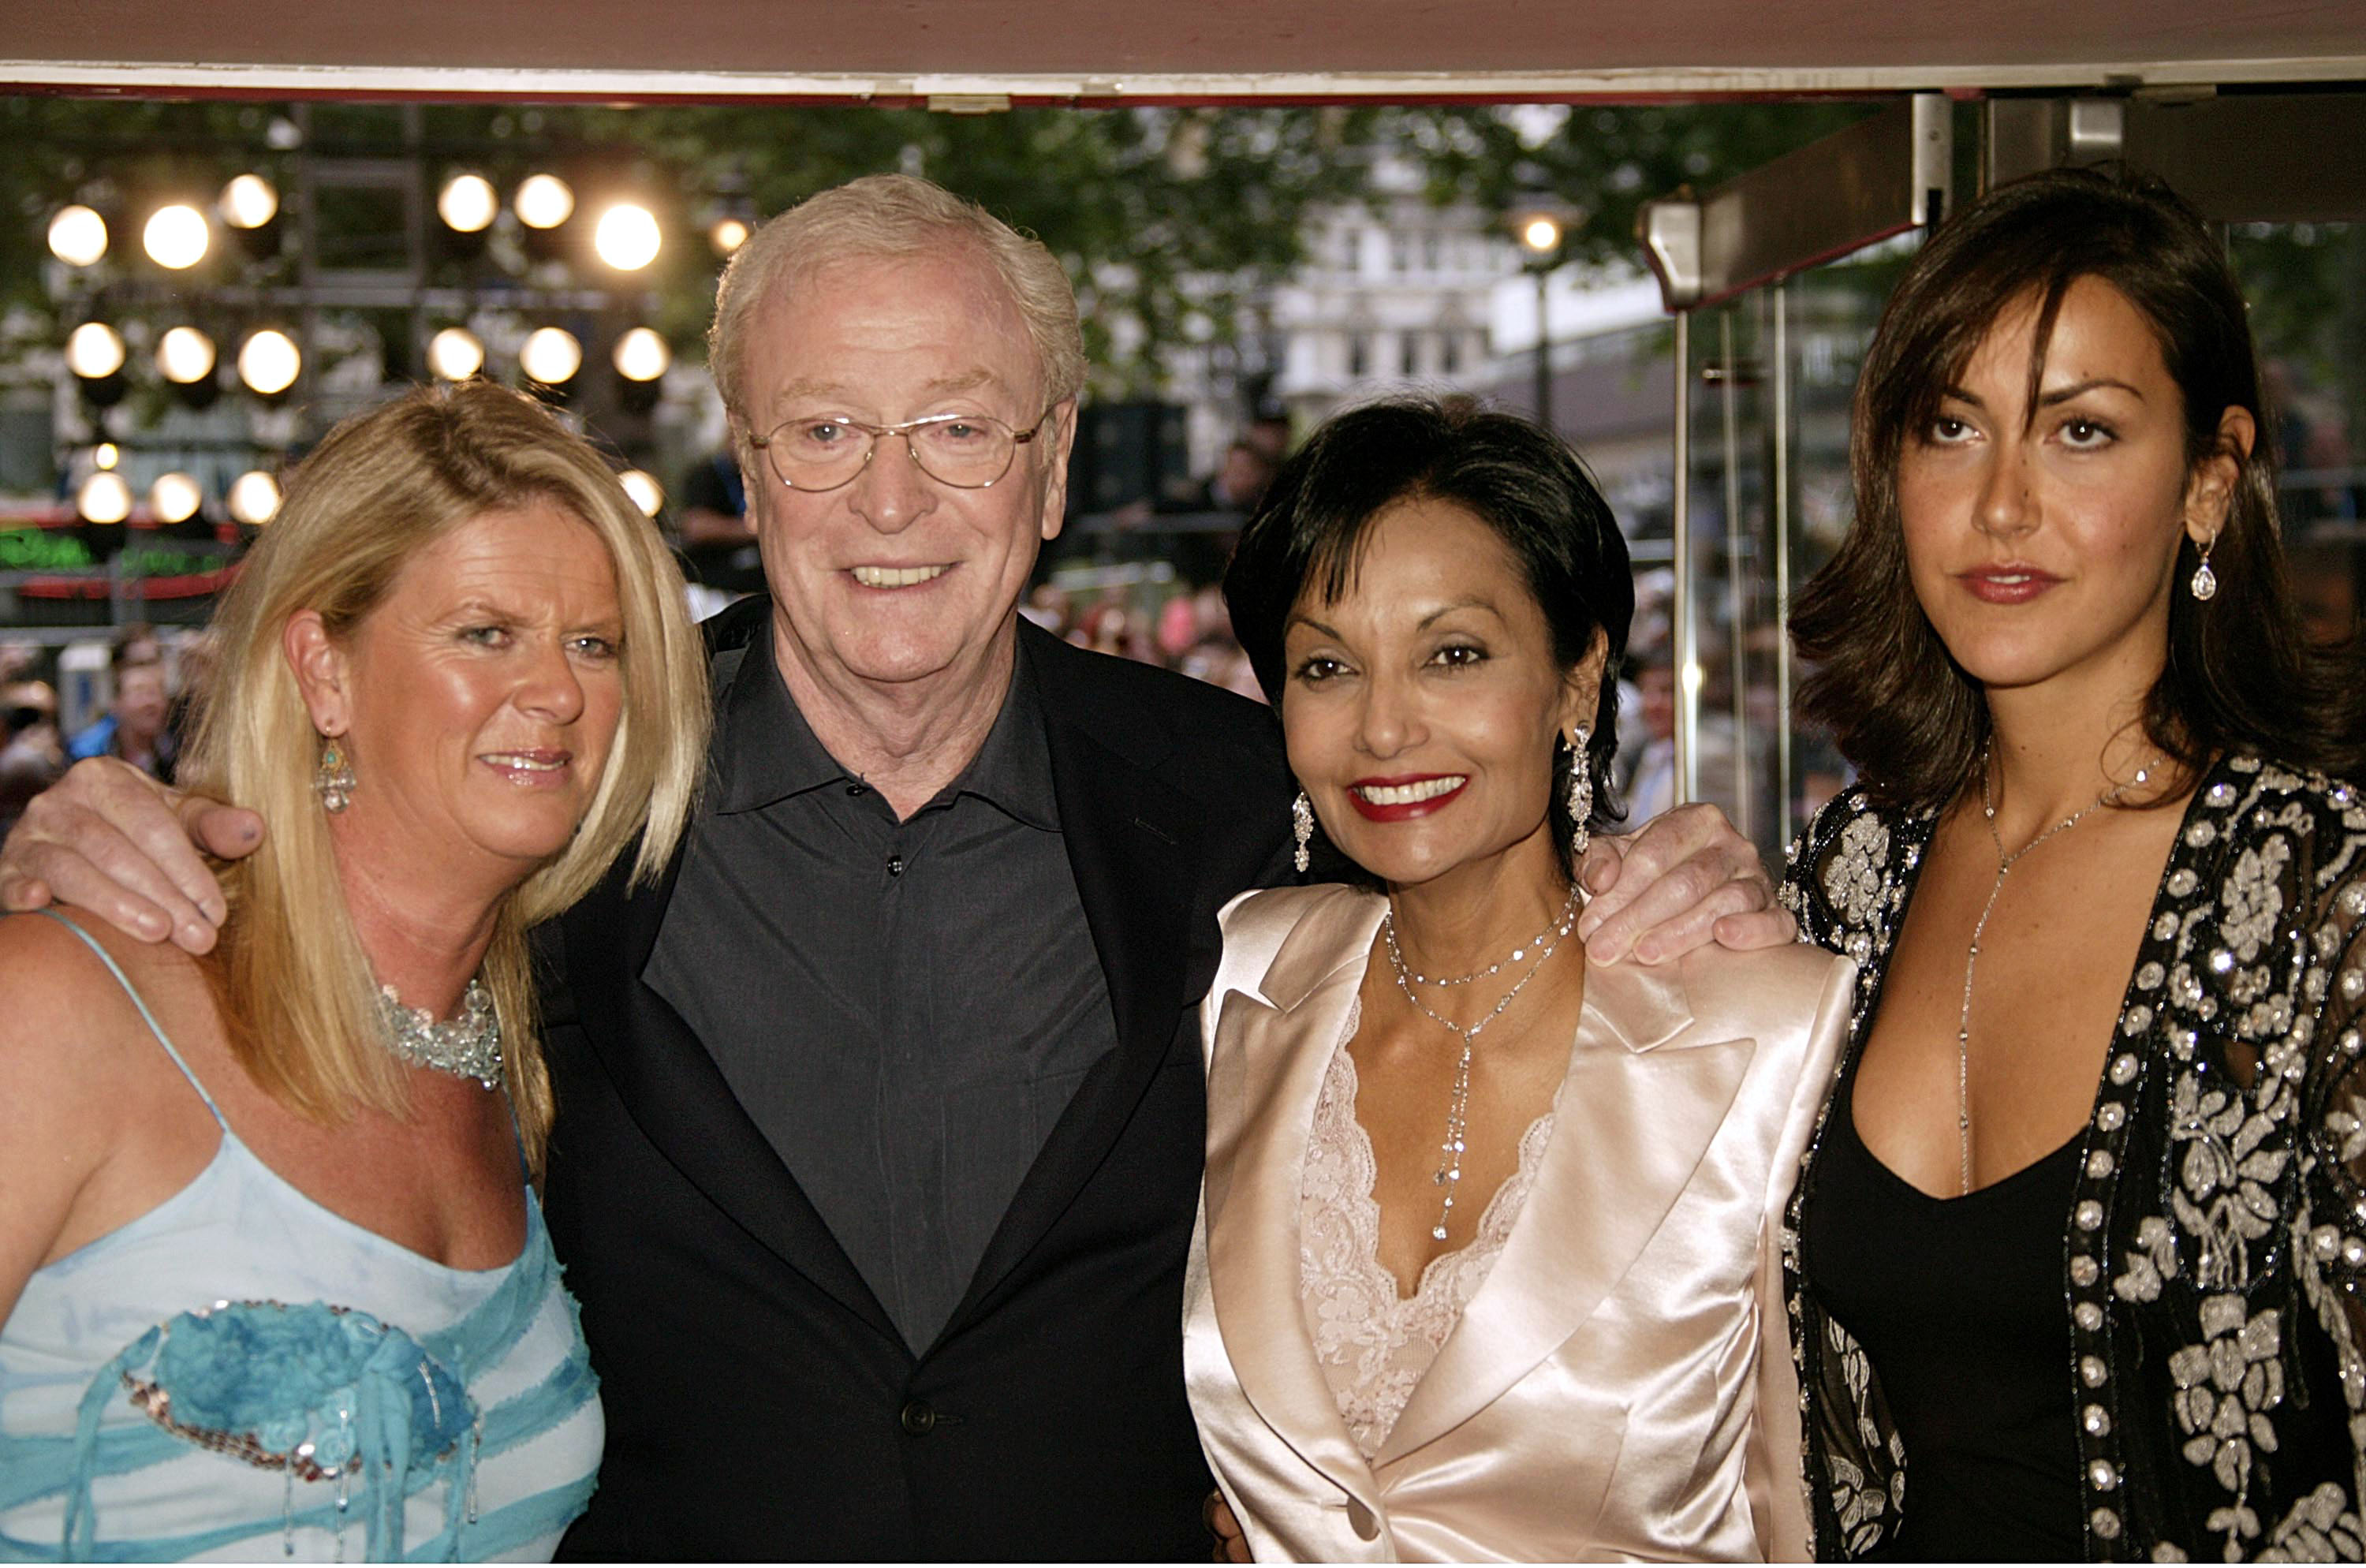 (L-R) Dominique Caine, Michael Caine, Shakira Caine, and Natasha Caine arrive at the European premiere of "Batman Begins" at the Odeon Leicester Square on June 12, 2005, in London, England. | Source: Getty Images